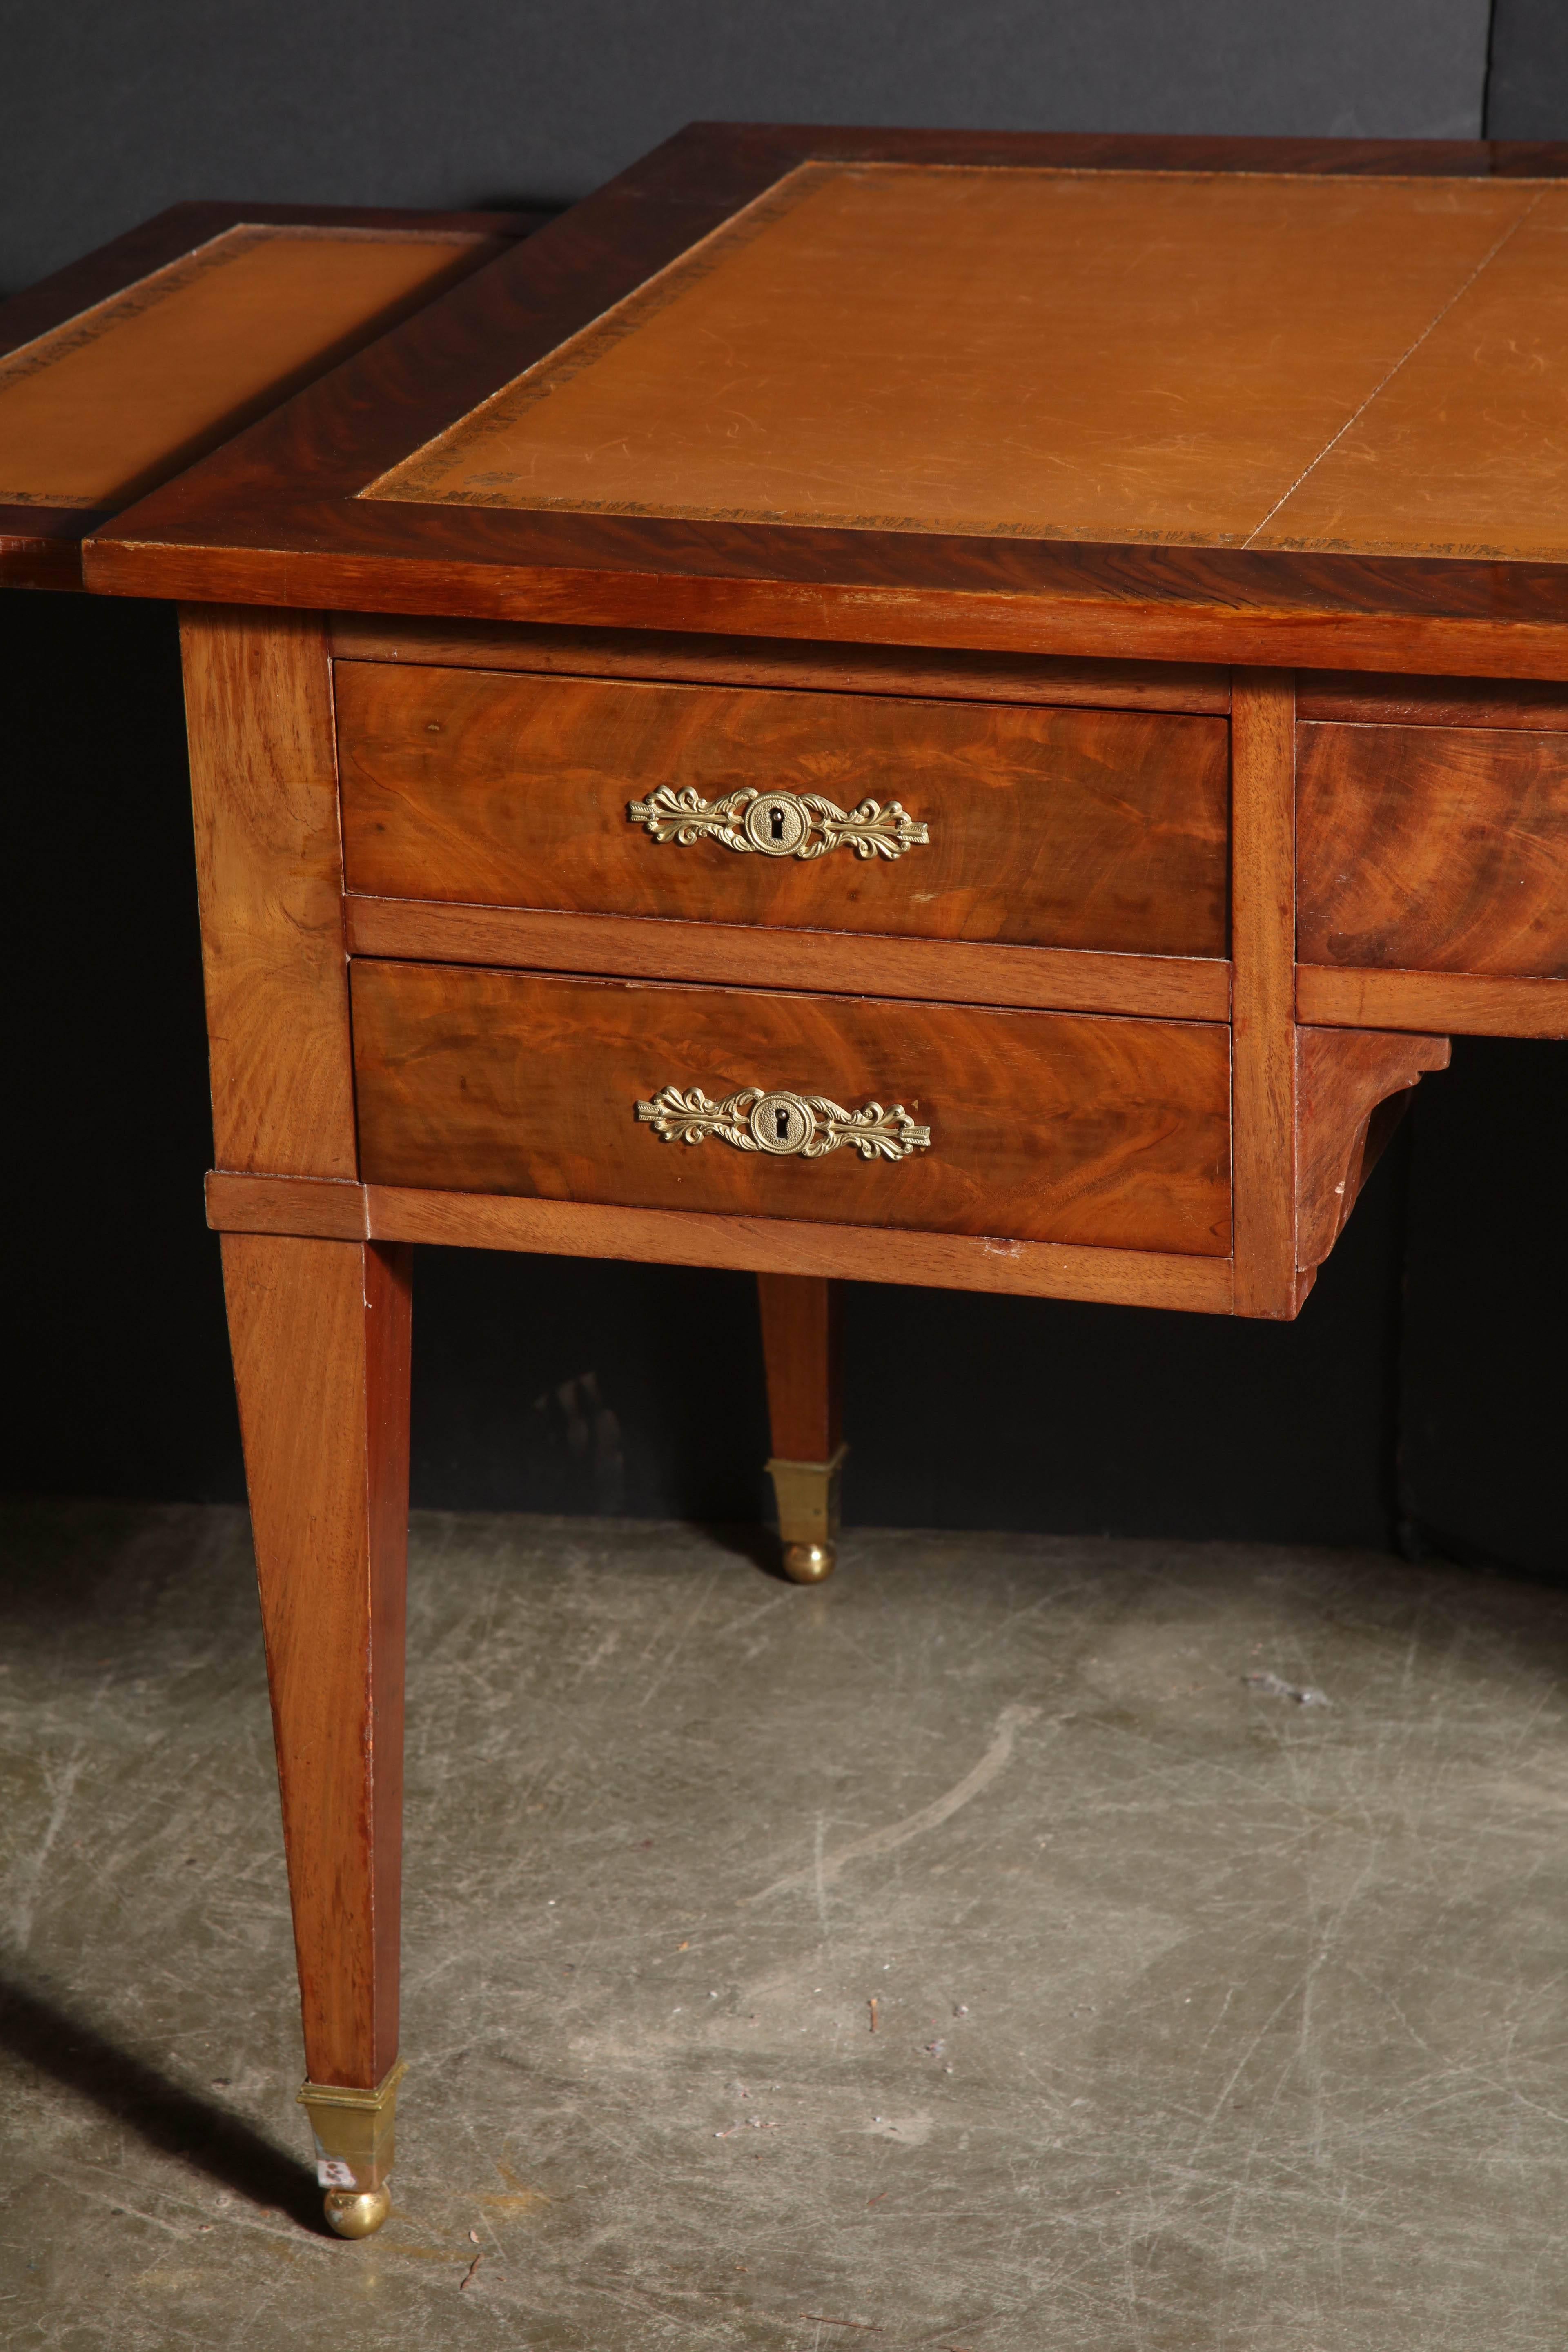 Fine French neoclassic mahogany leather top bureau plat with double slides, brass ball sabots, bronze escutcheons and a fitted double drawer.